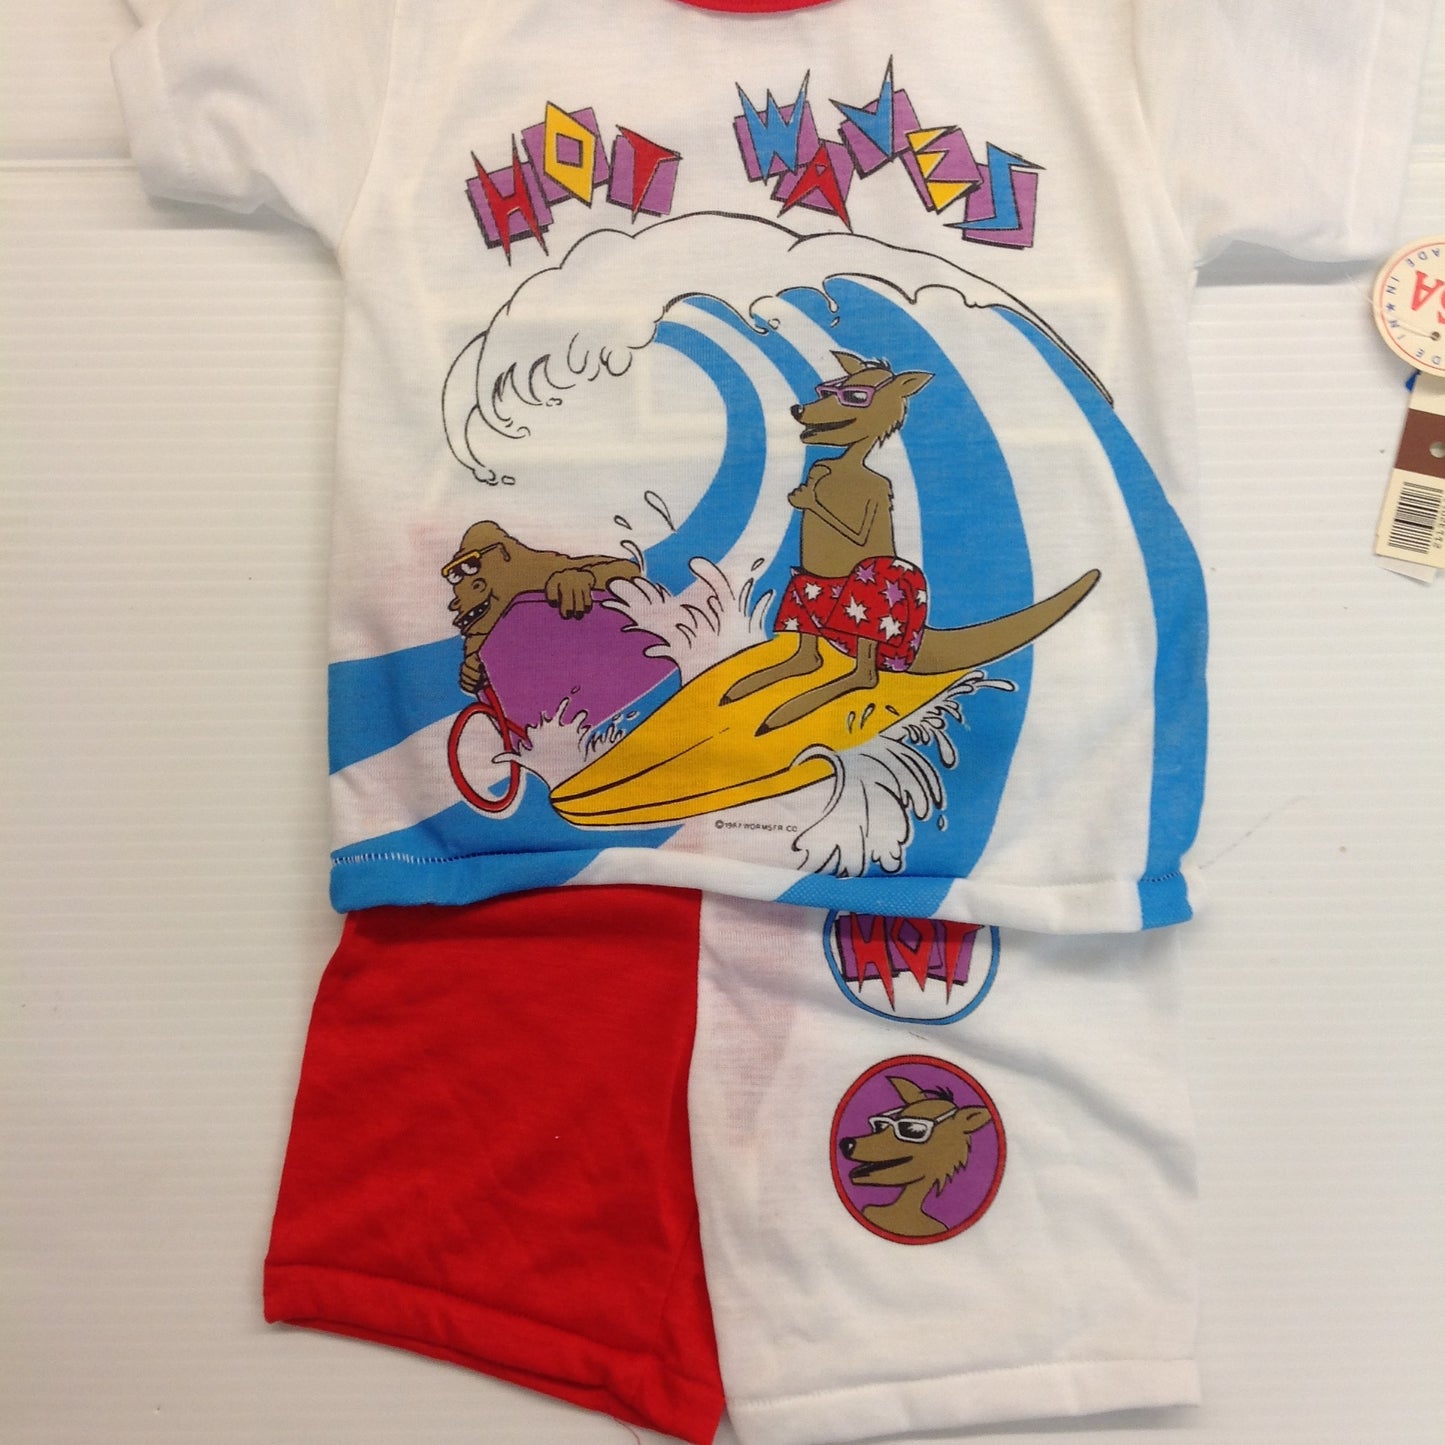 Vintage Wormserwear Child's 2Pc Pajama Top Shorts Hot Waves Gorilla Kangaroo Surf 3T New with Tags